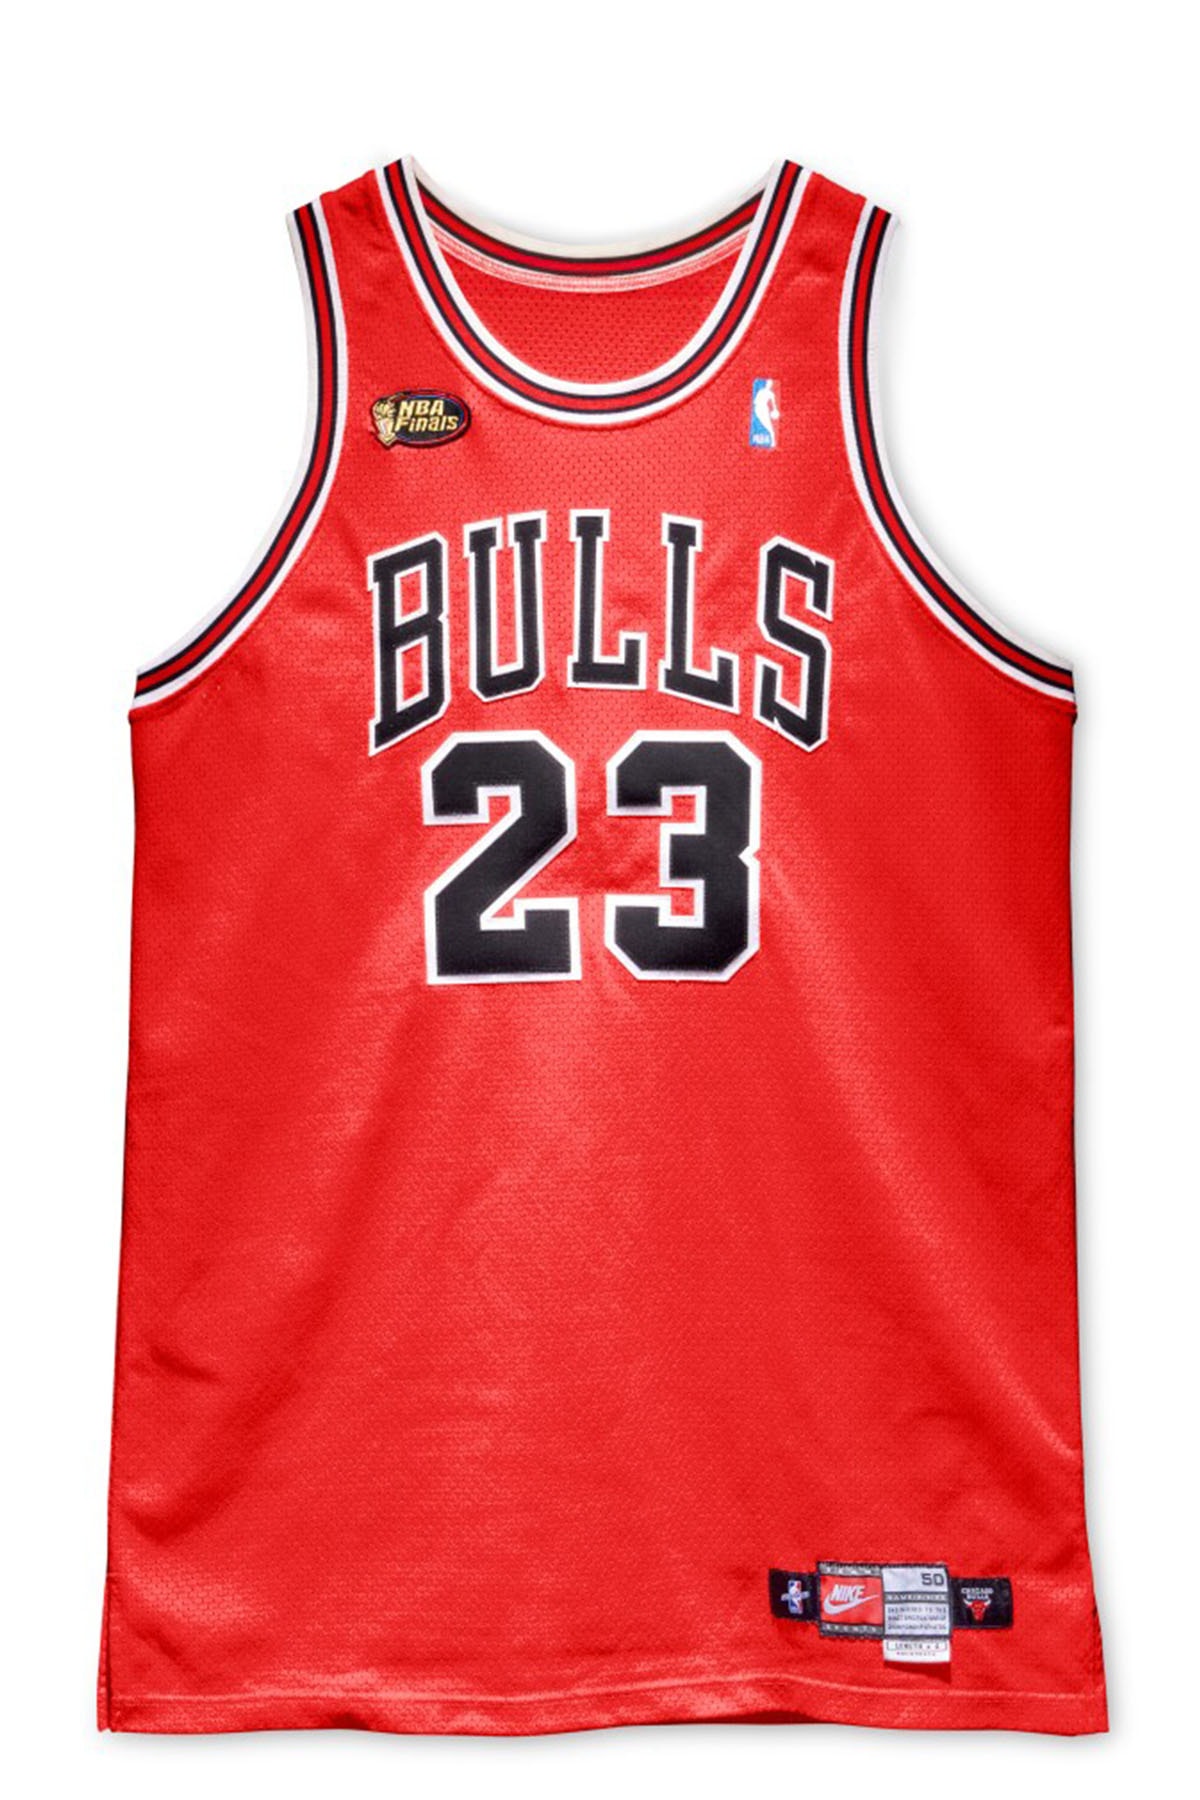 MJが98年のNBAファイナルで着用したナイキ製ジャージが約14億4,600万円で落札される Michael Jordan's Nike jersey from the 1998 NBA Finals is up for auction